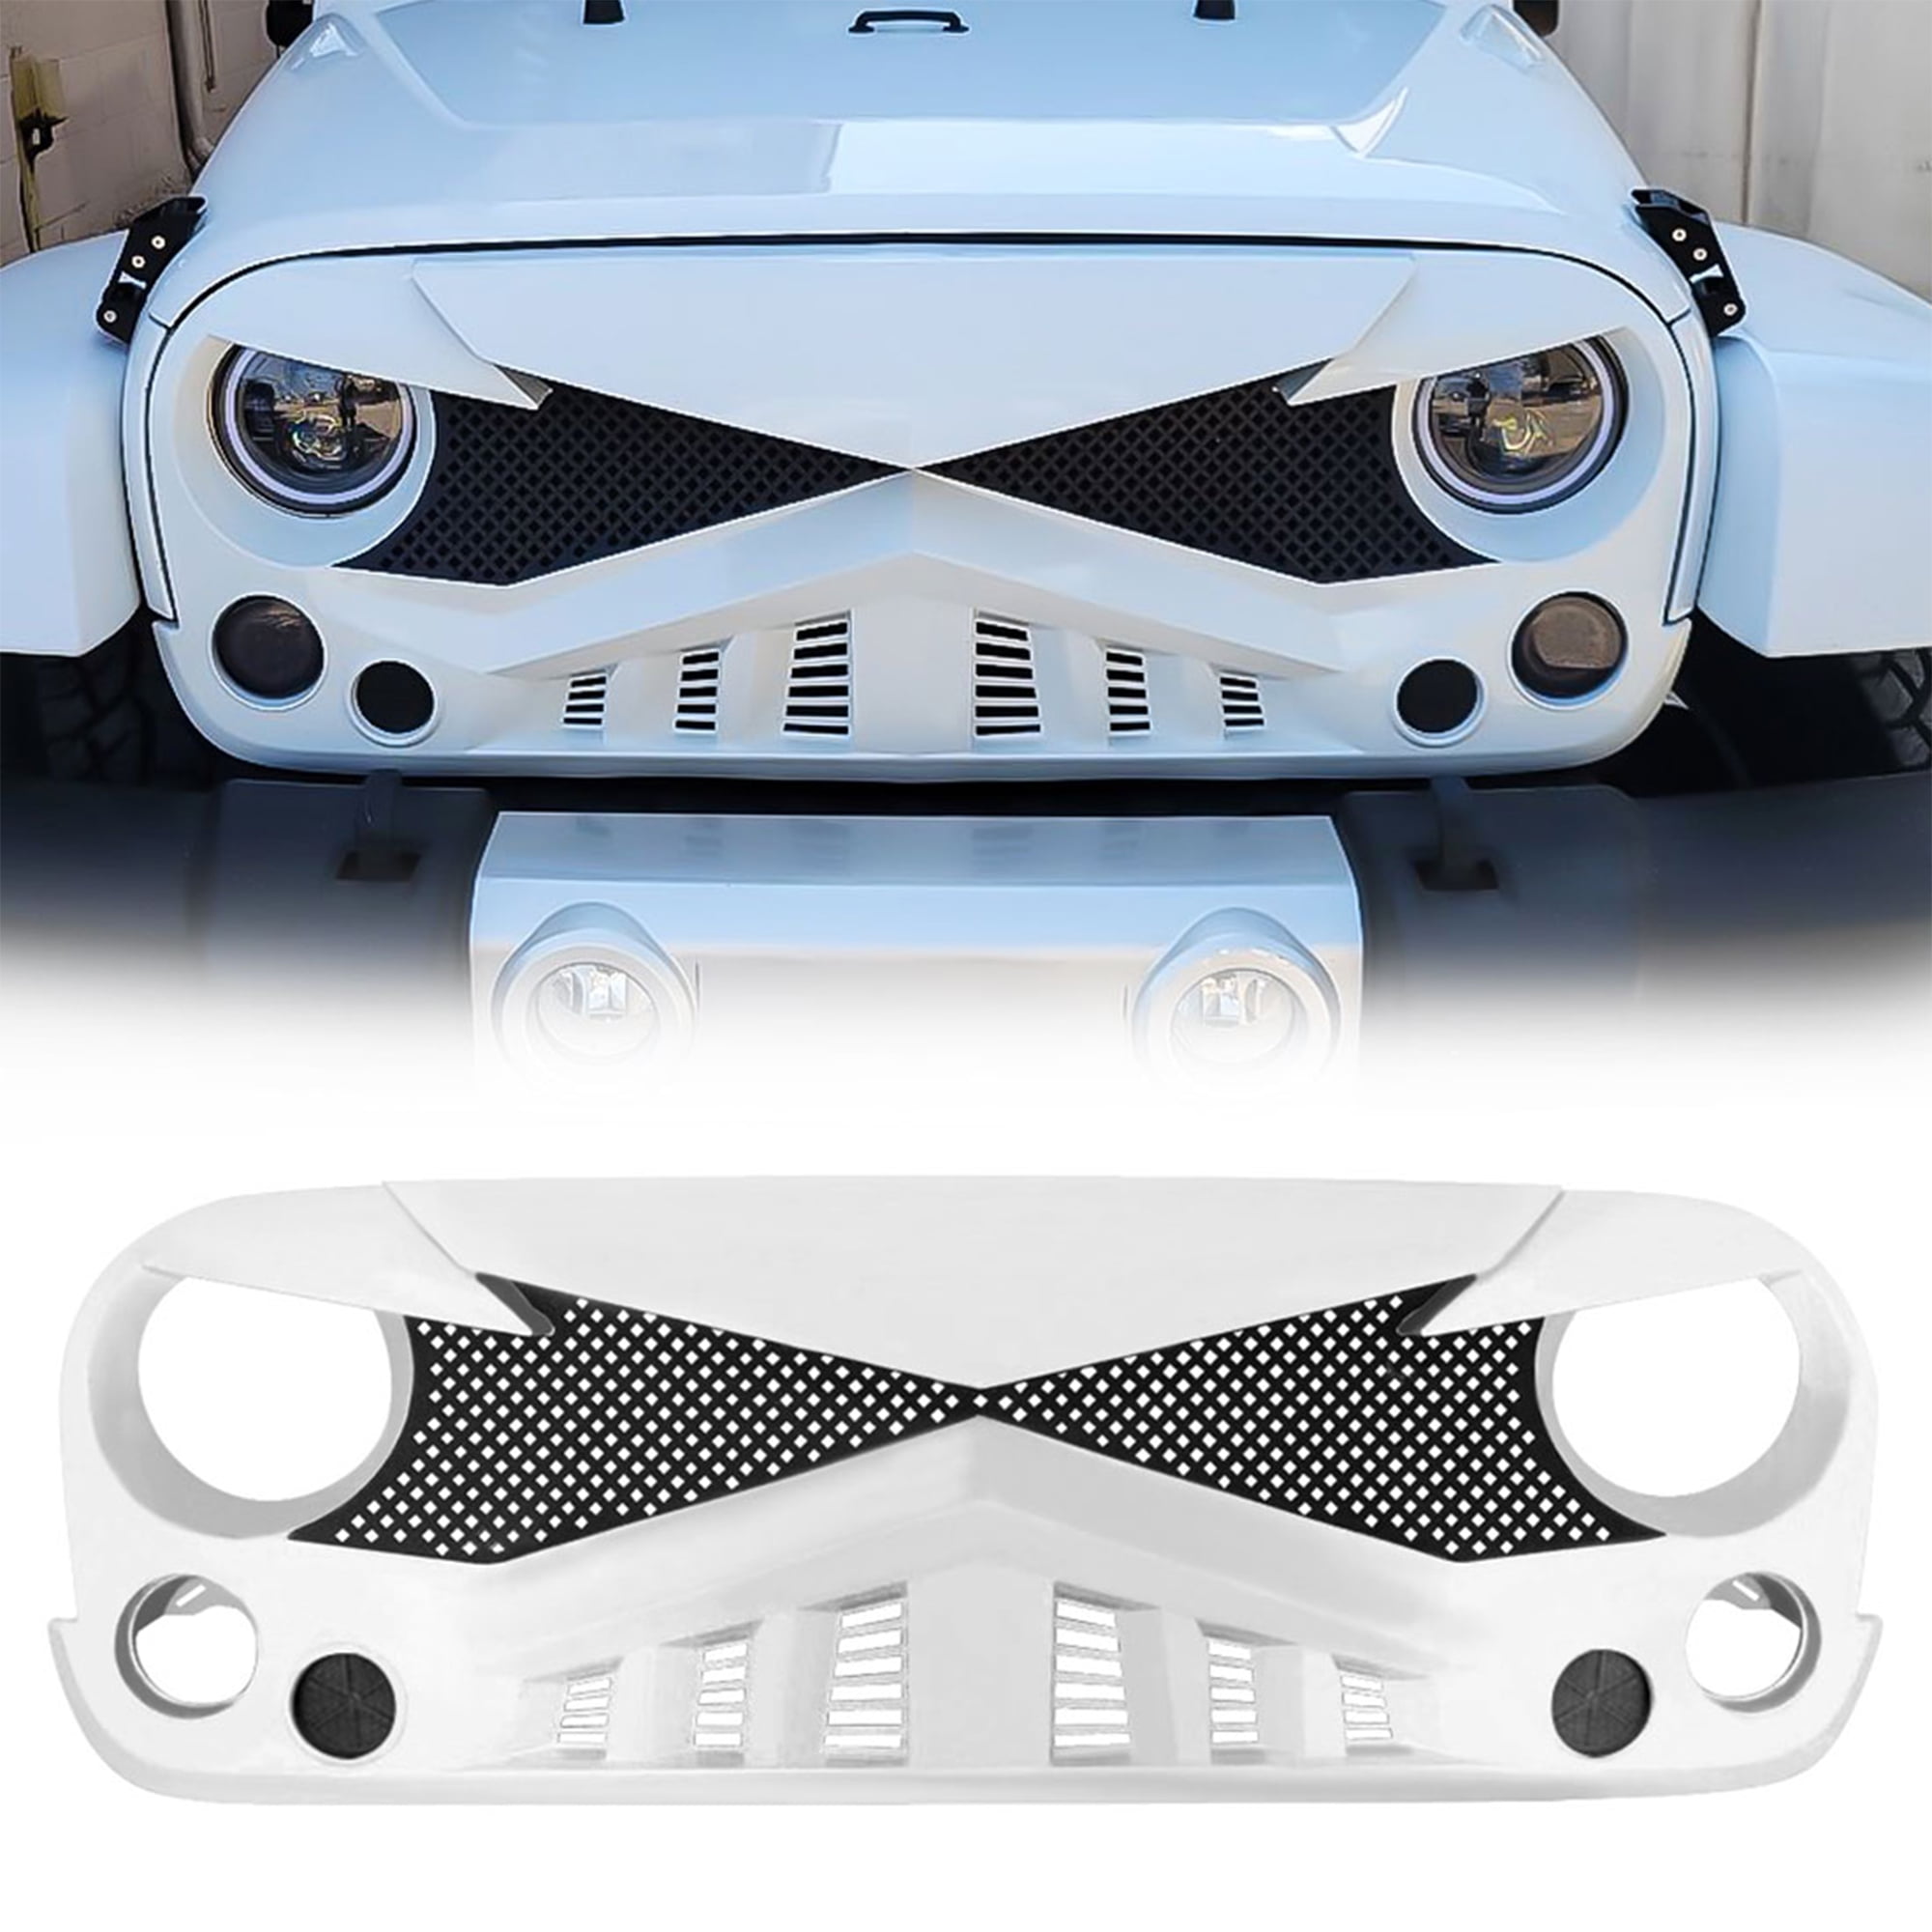 AMERICAN MODIFIED Hawke Grille for 07-18 Jeep Wrangler JK Models, White 